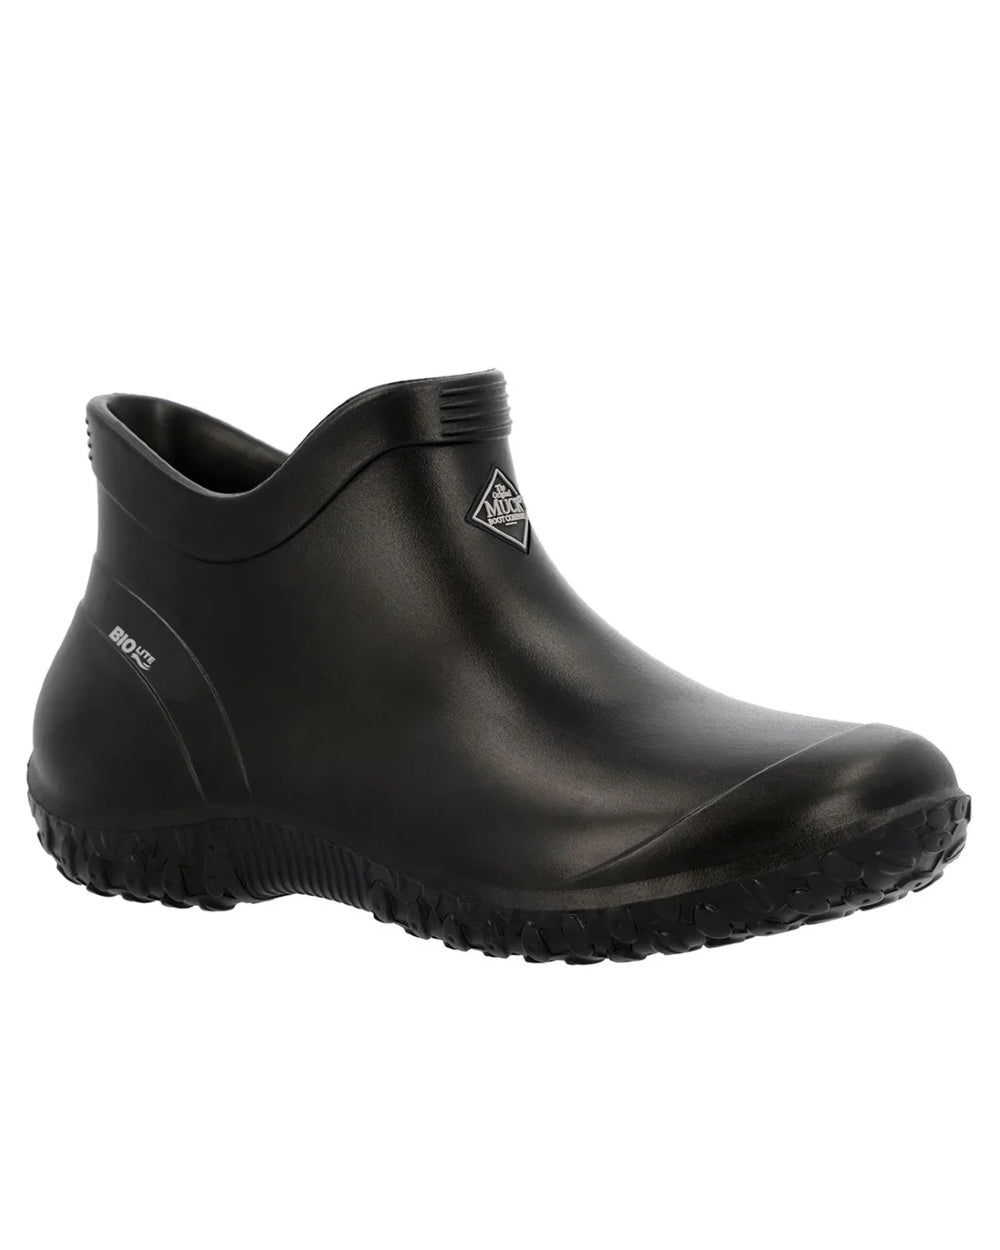 Black Coloured Muck Boots Mens Muckster Lite Ankle Boots On A White Background 